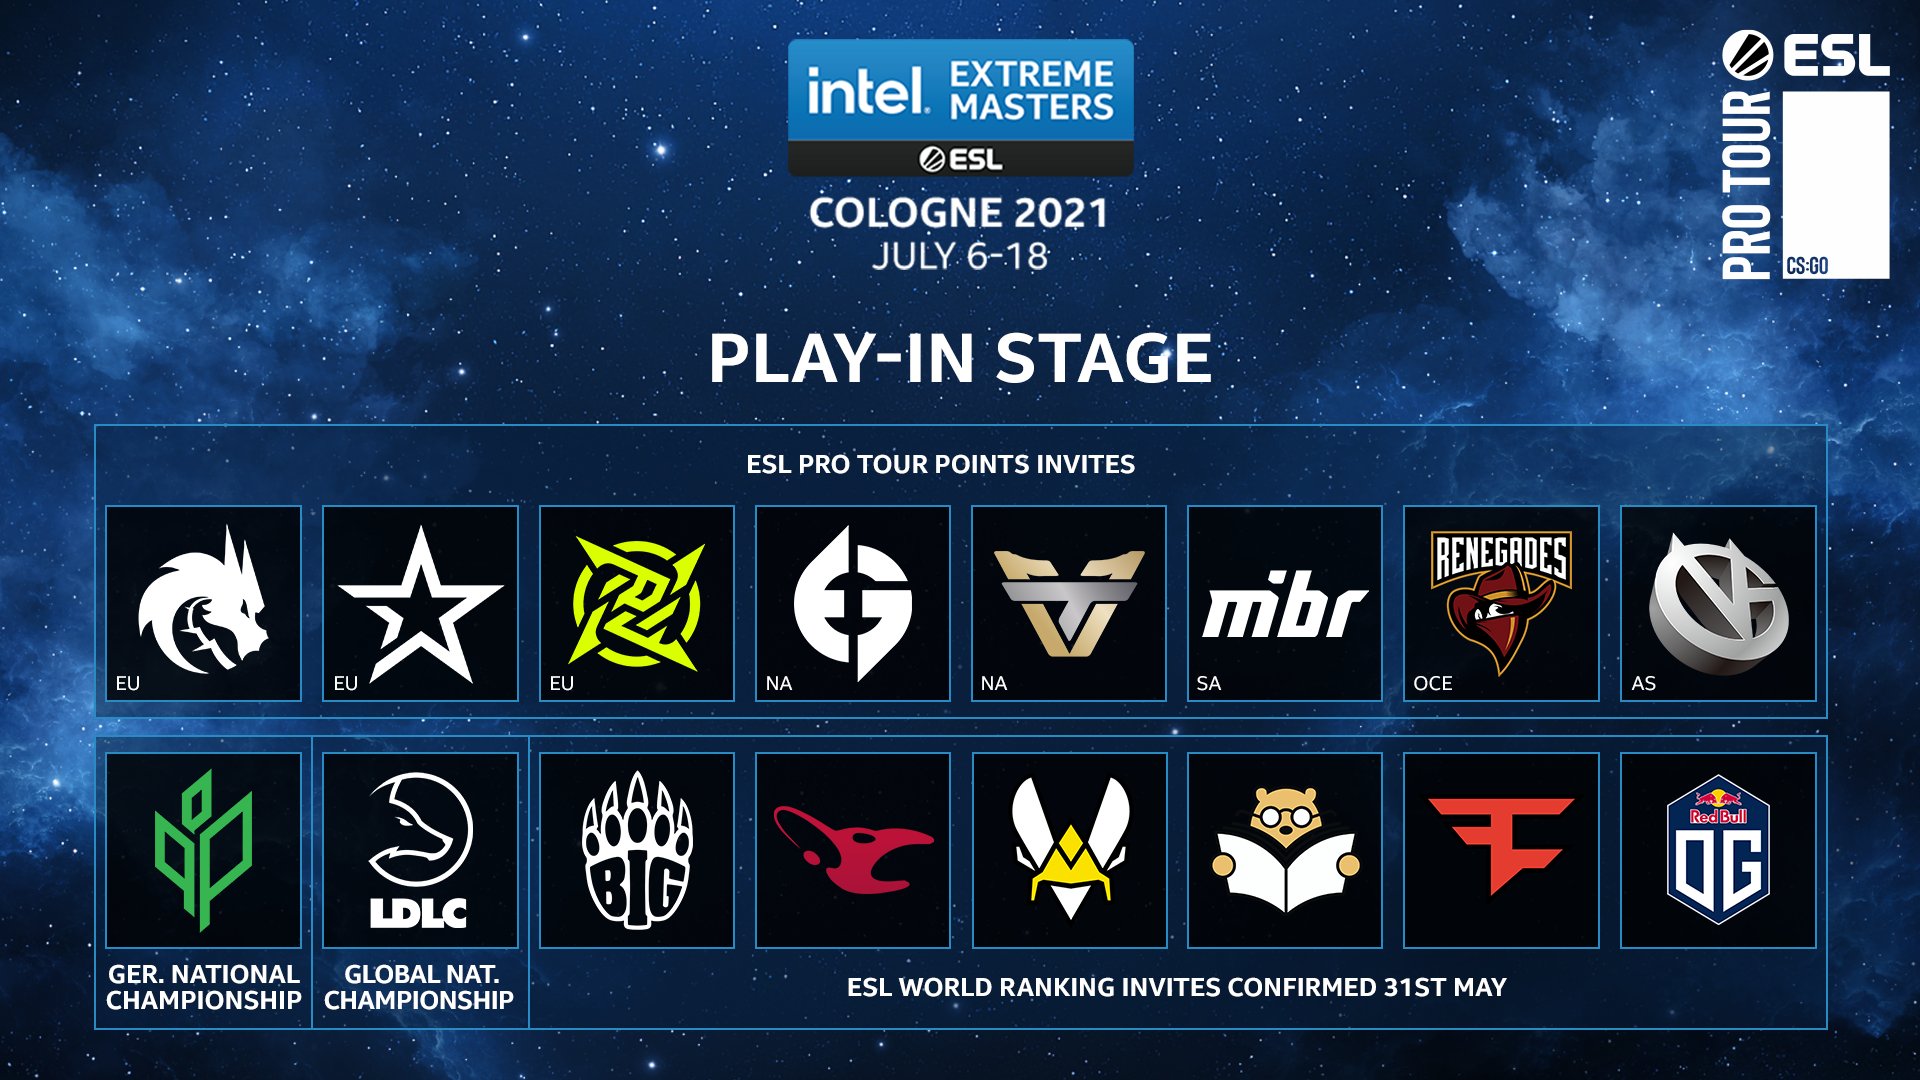 First matchups of IEM Cologne 2021 play-in stage revealed | Dot Esports